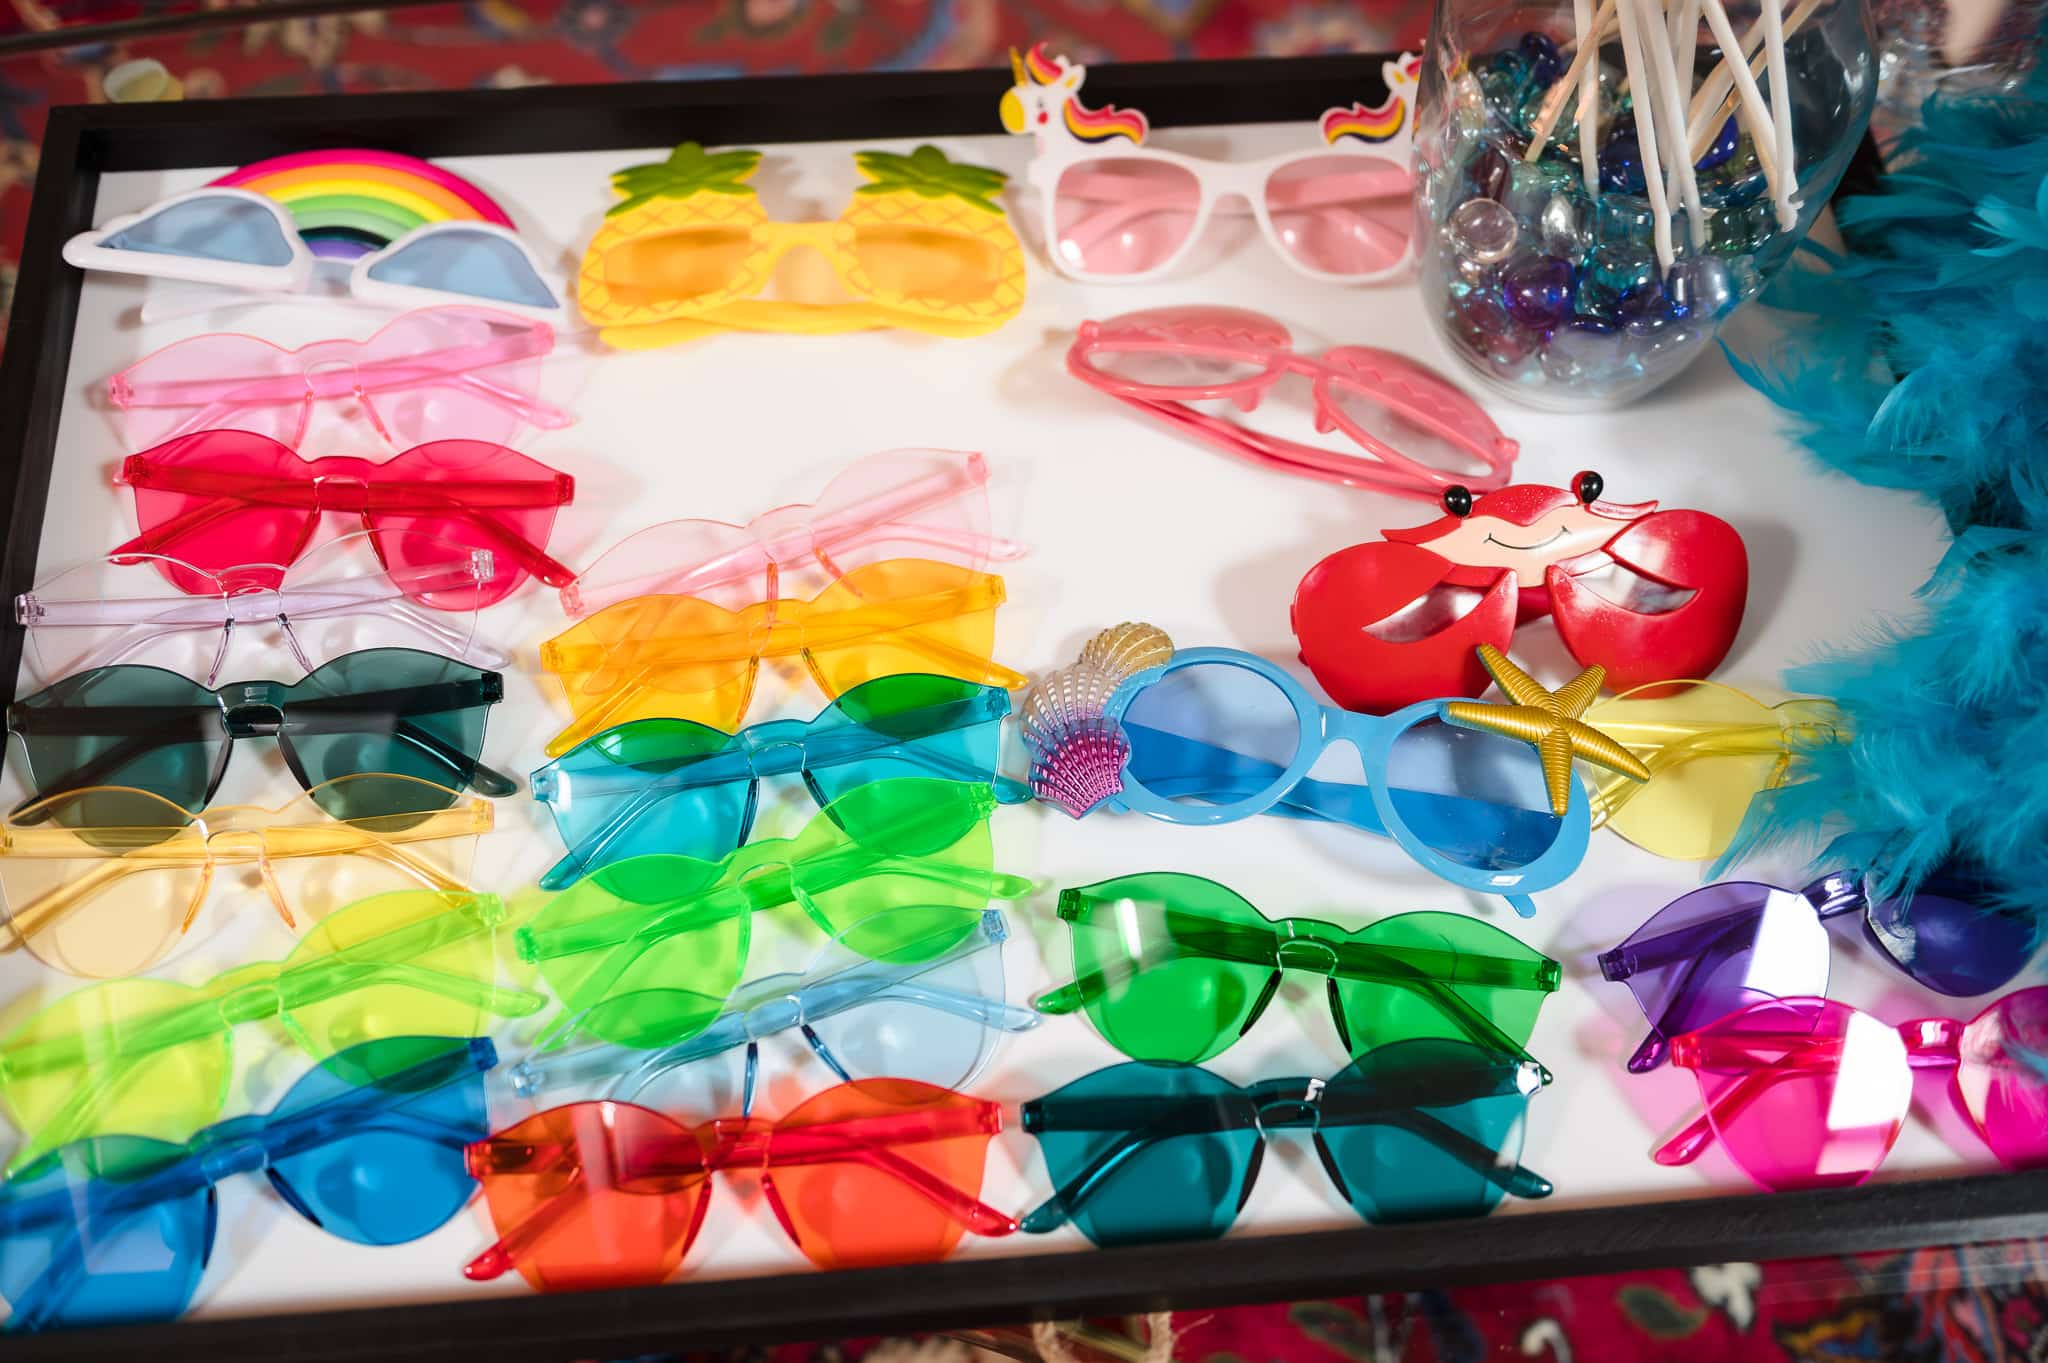 A tray filled with fun and silly sunglasses of different colors to be worn while taking photos in a photo booth.